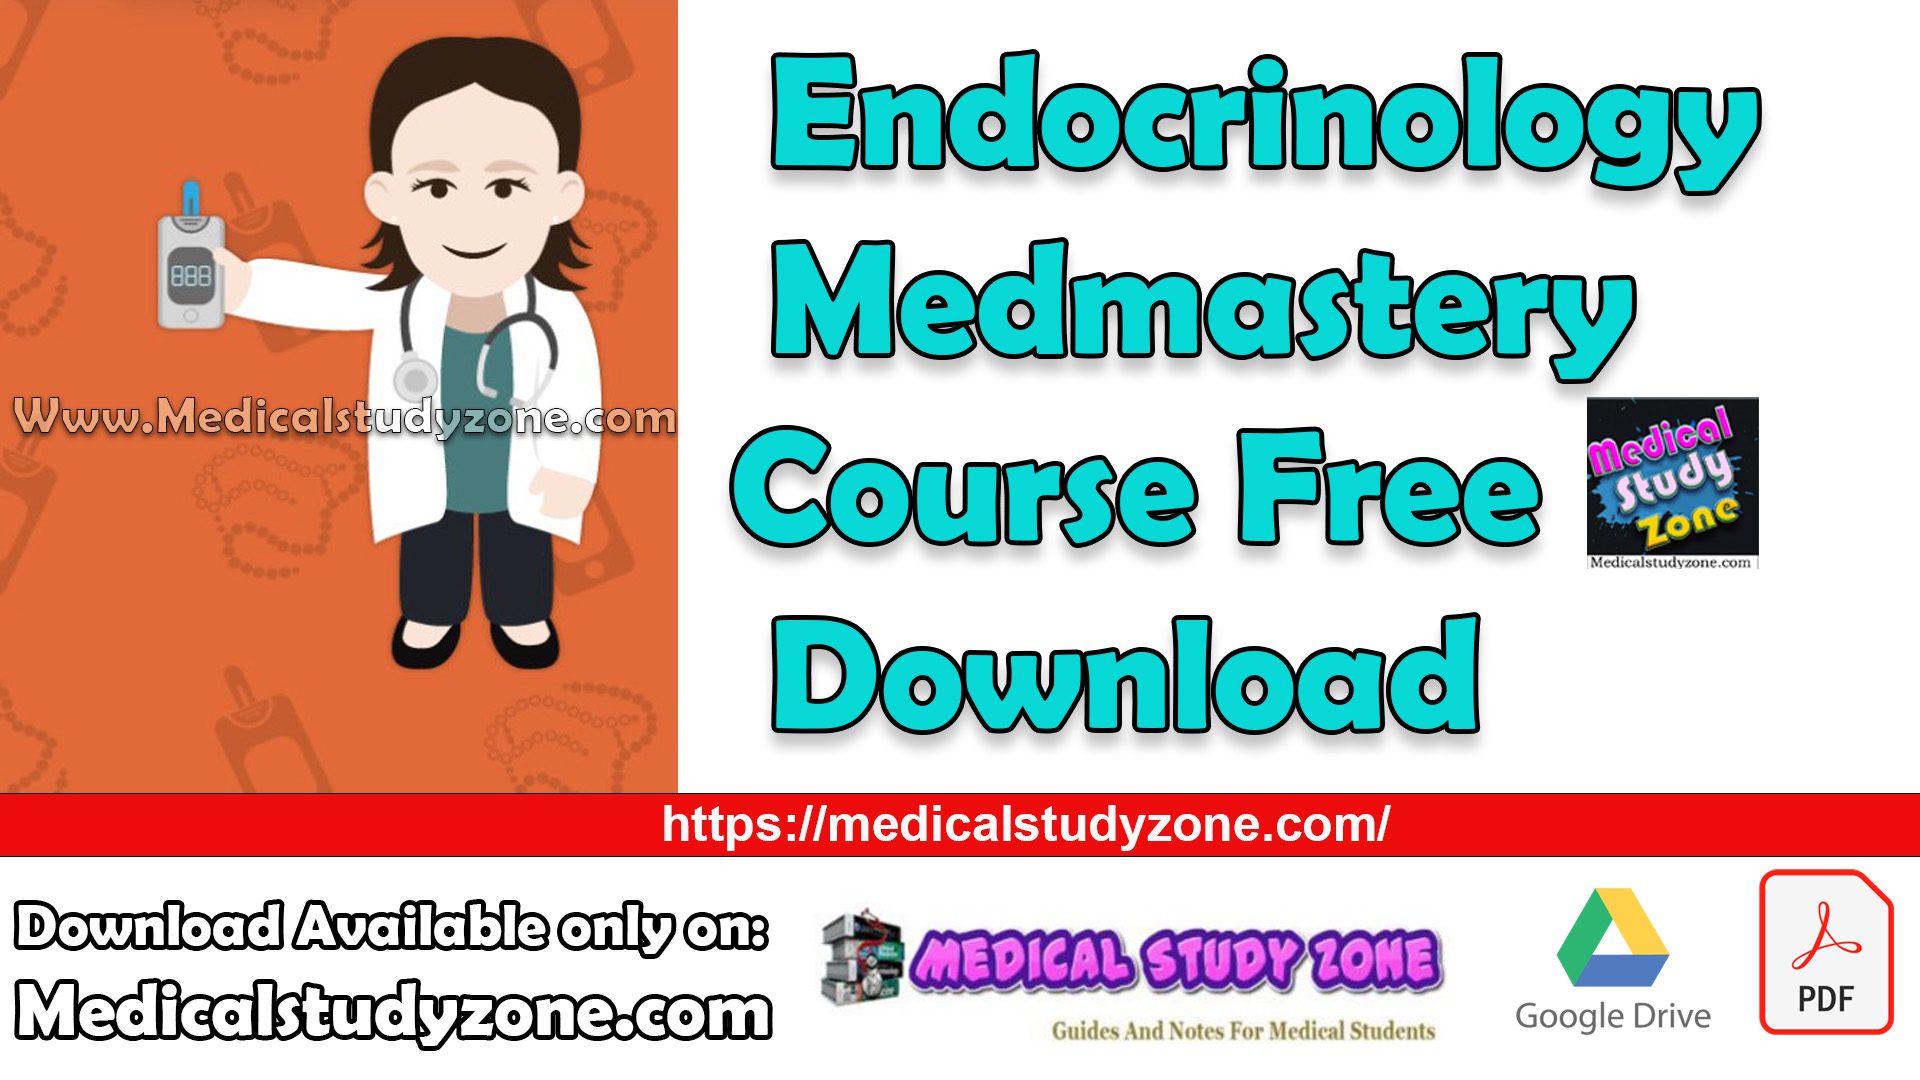 Endocrinology Medmastery Course Free Download